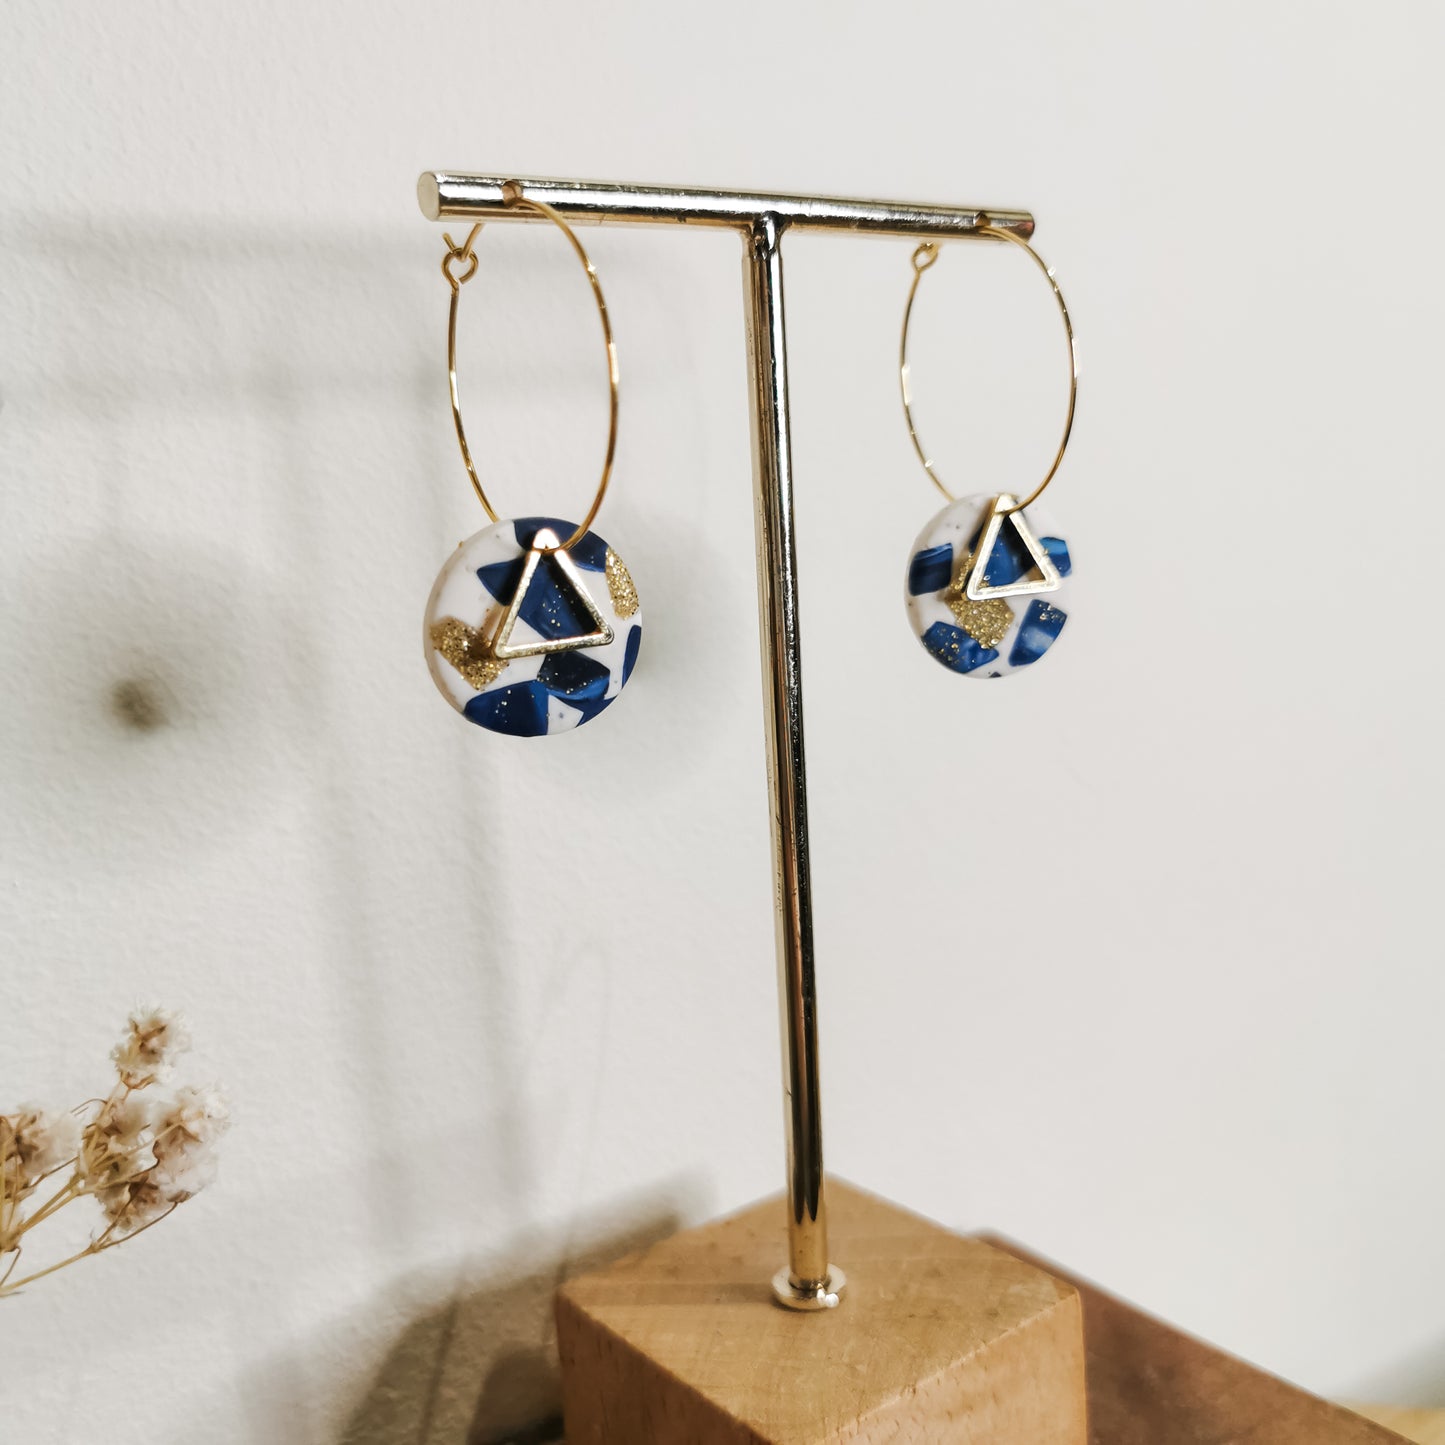 HIGAN ONEN | round drop with triangle detail 30mm hoop earrings in mussel shell terrazzo